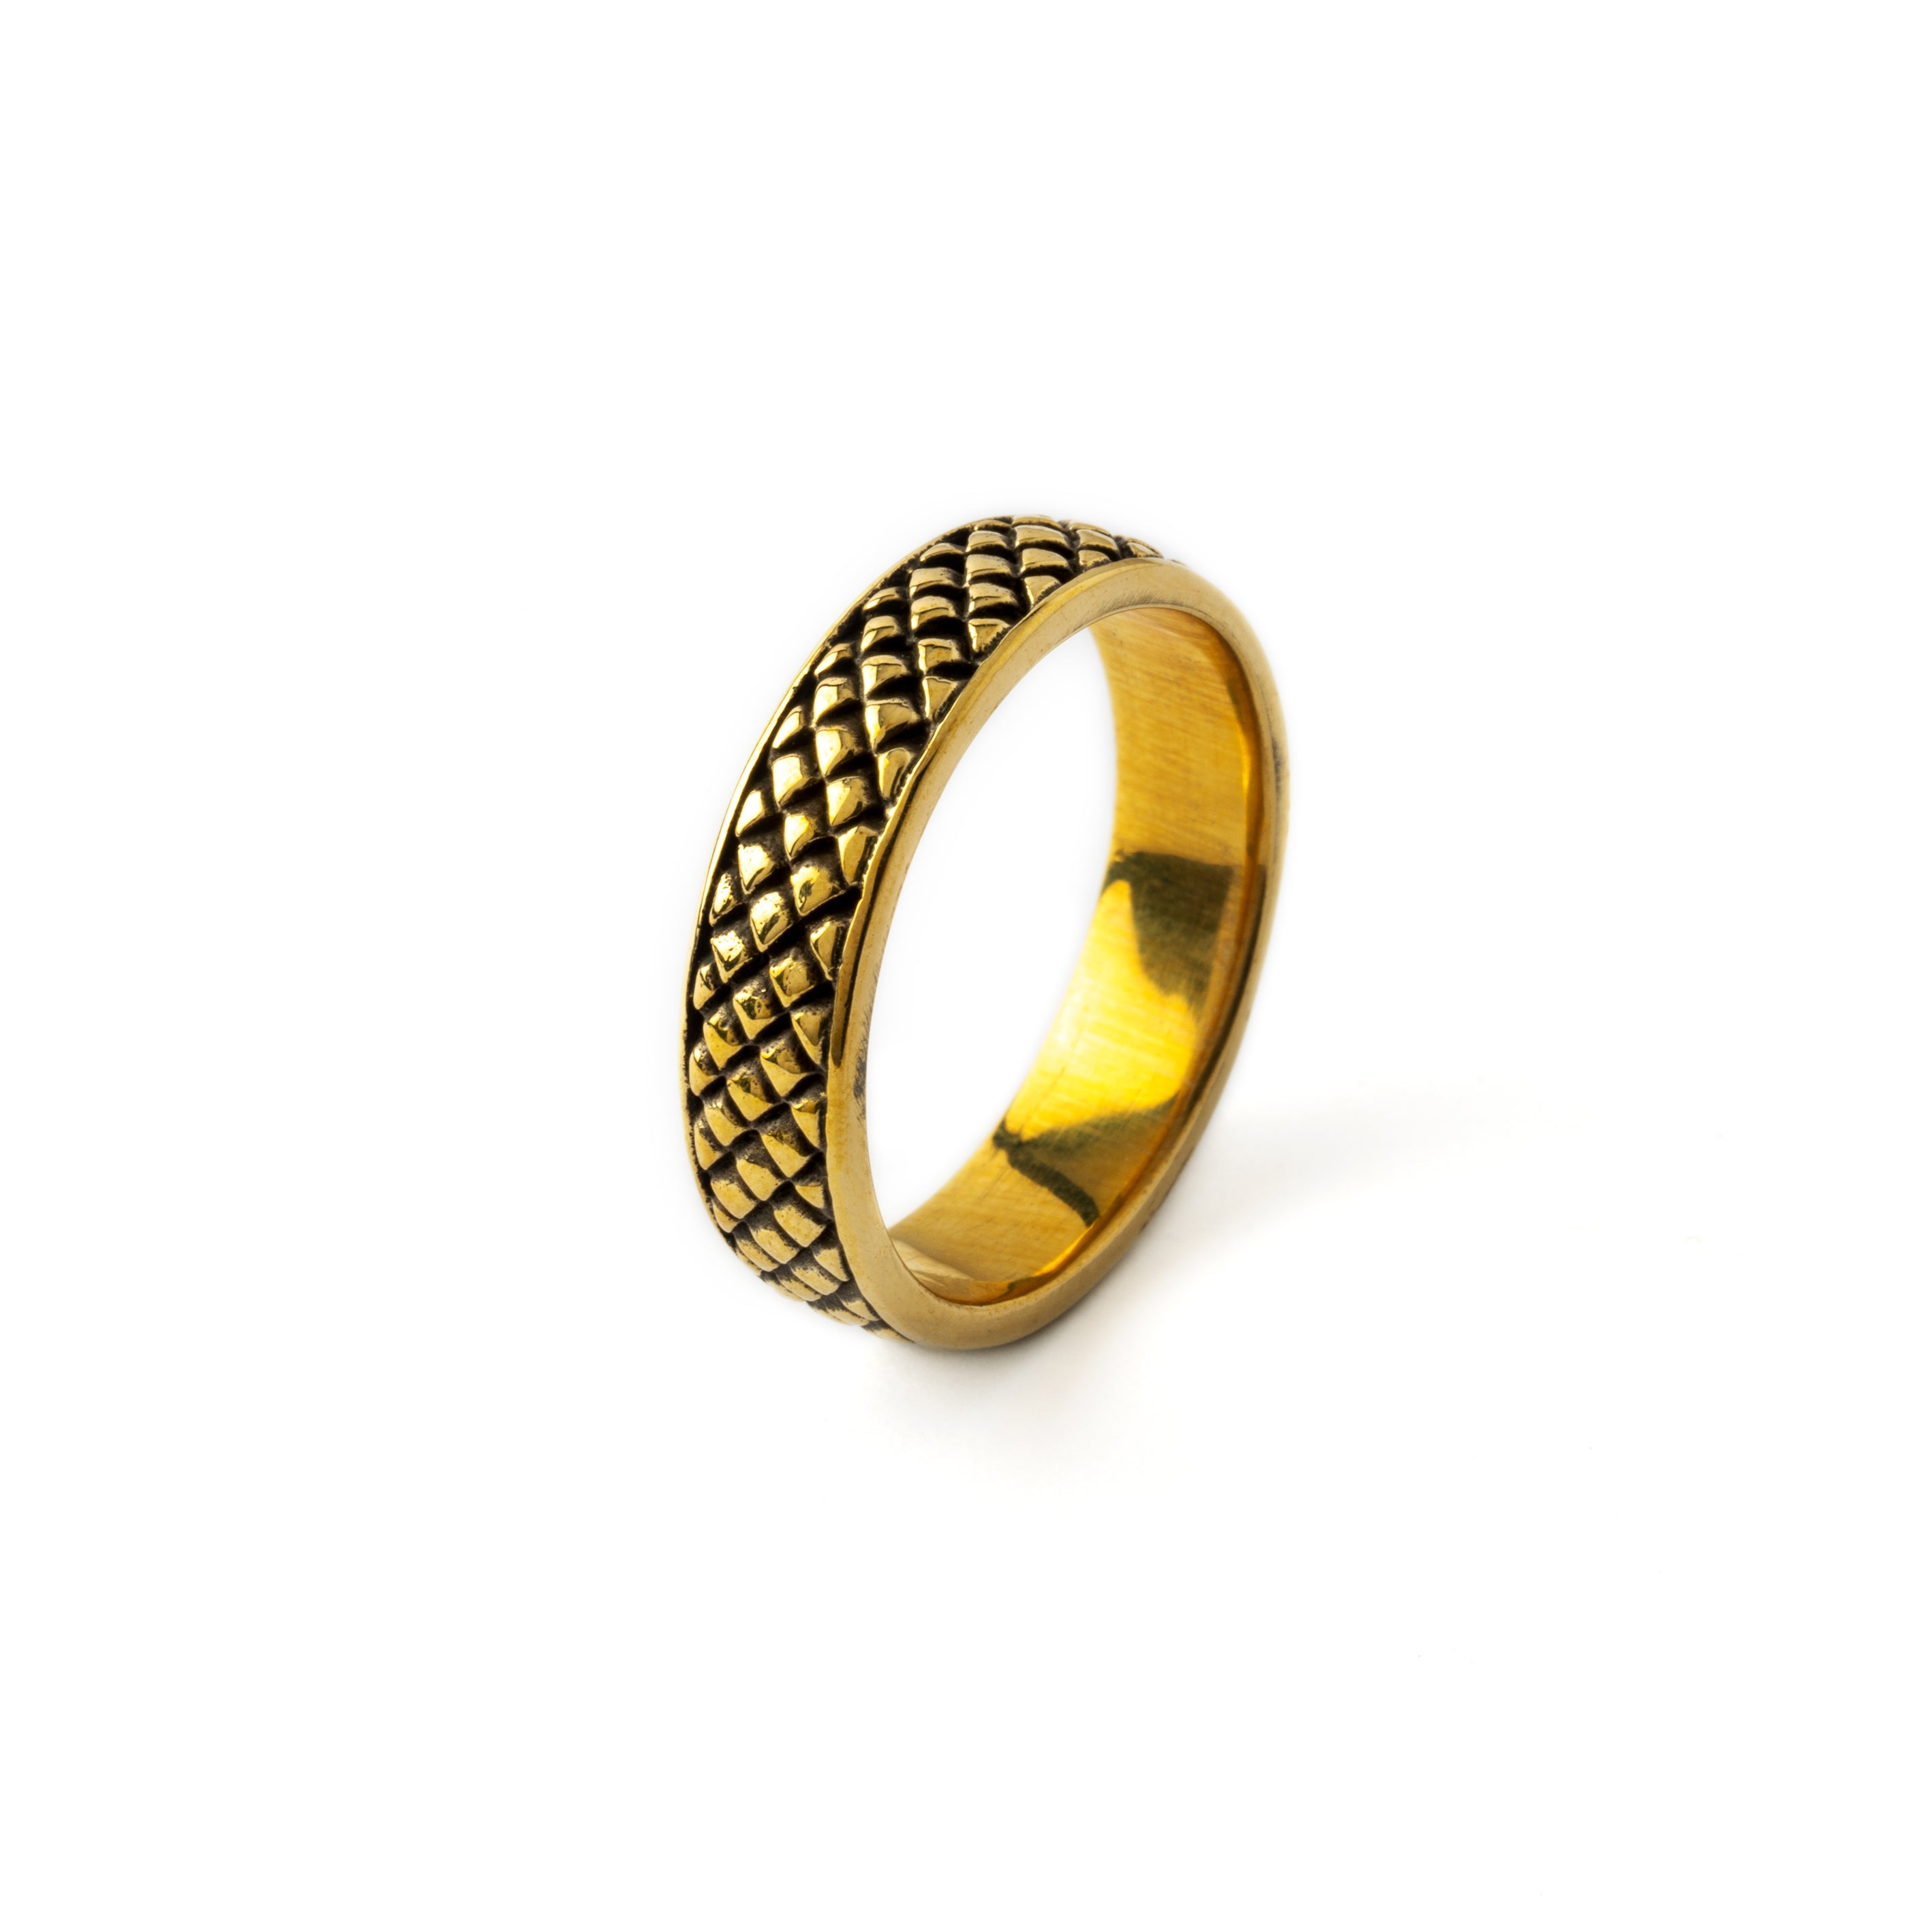 Rebirth- golden brass band ring with snake scales side view